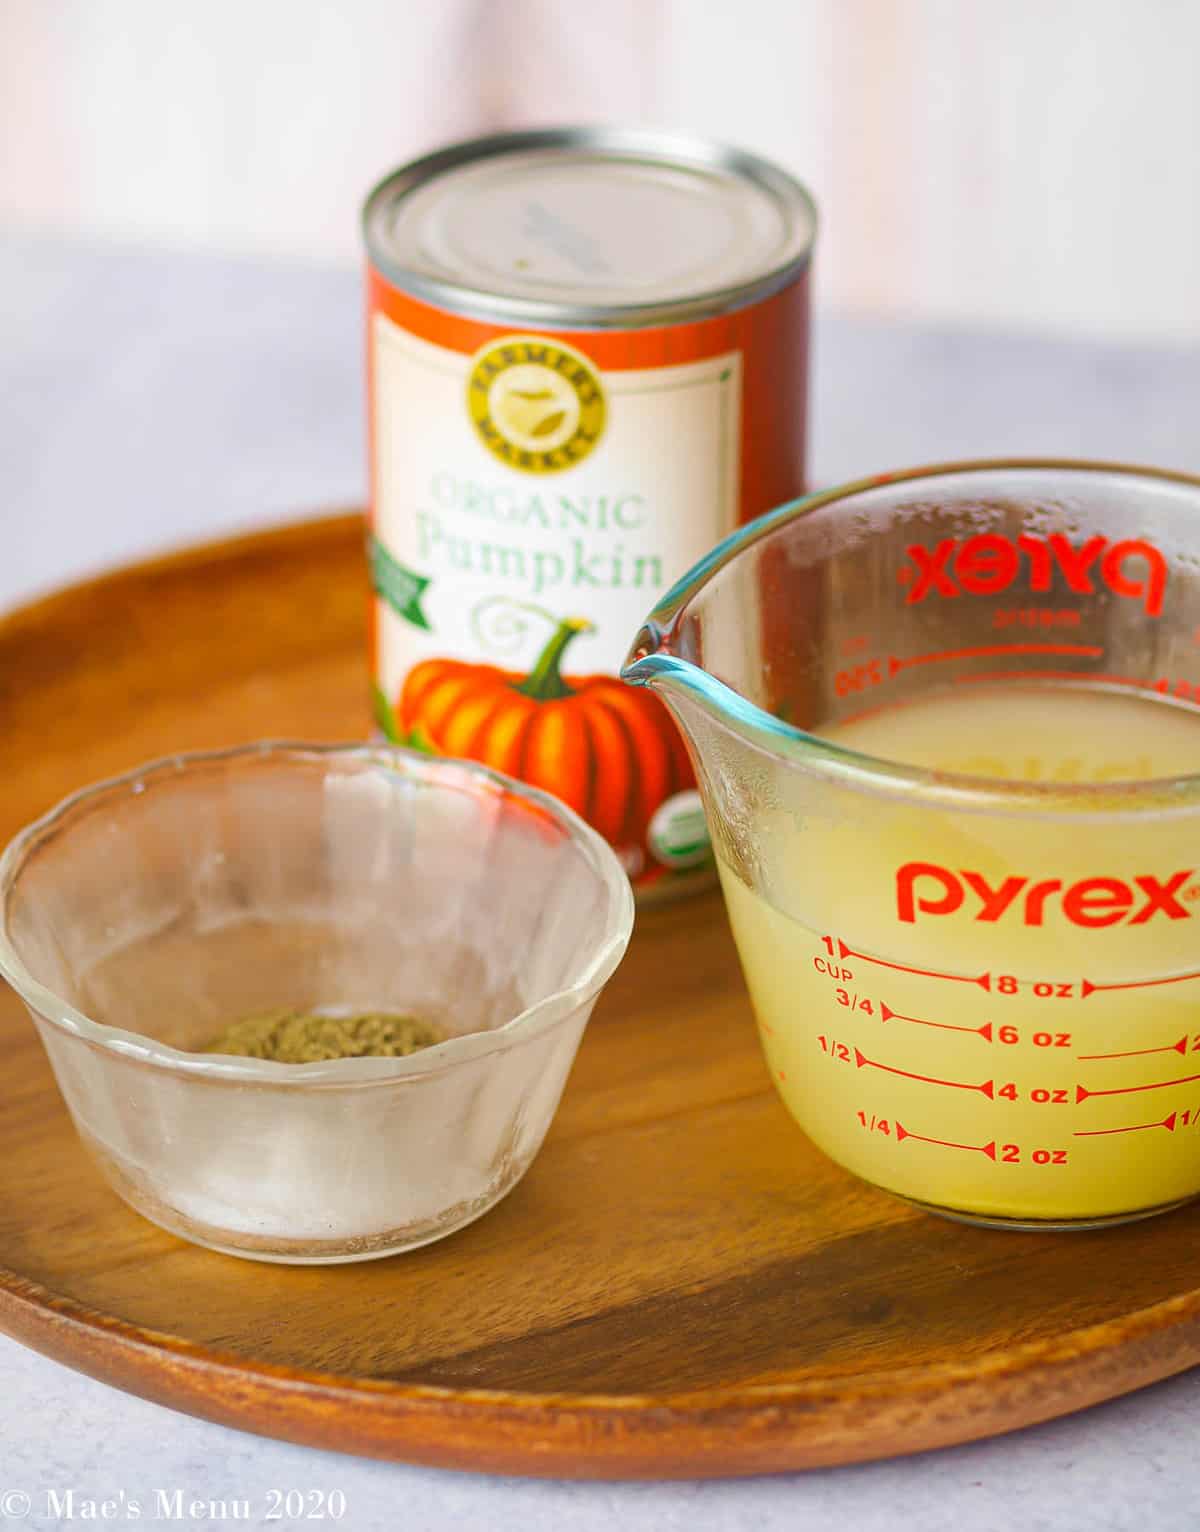 Some ingredients for parmesan pumpkin chicken: a can of pumpkin, a small dish of herbs and salt, and a measuring cup of chicken broth